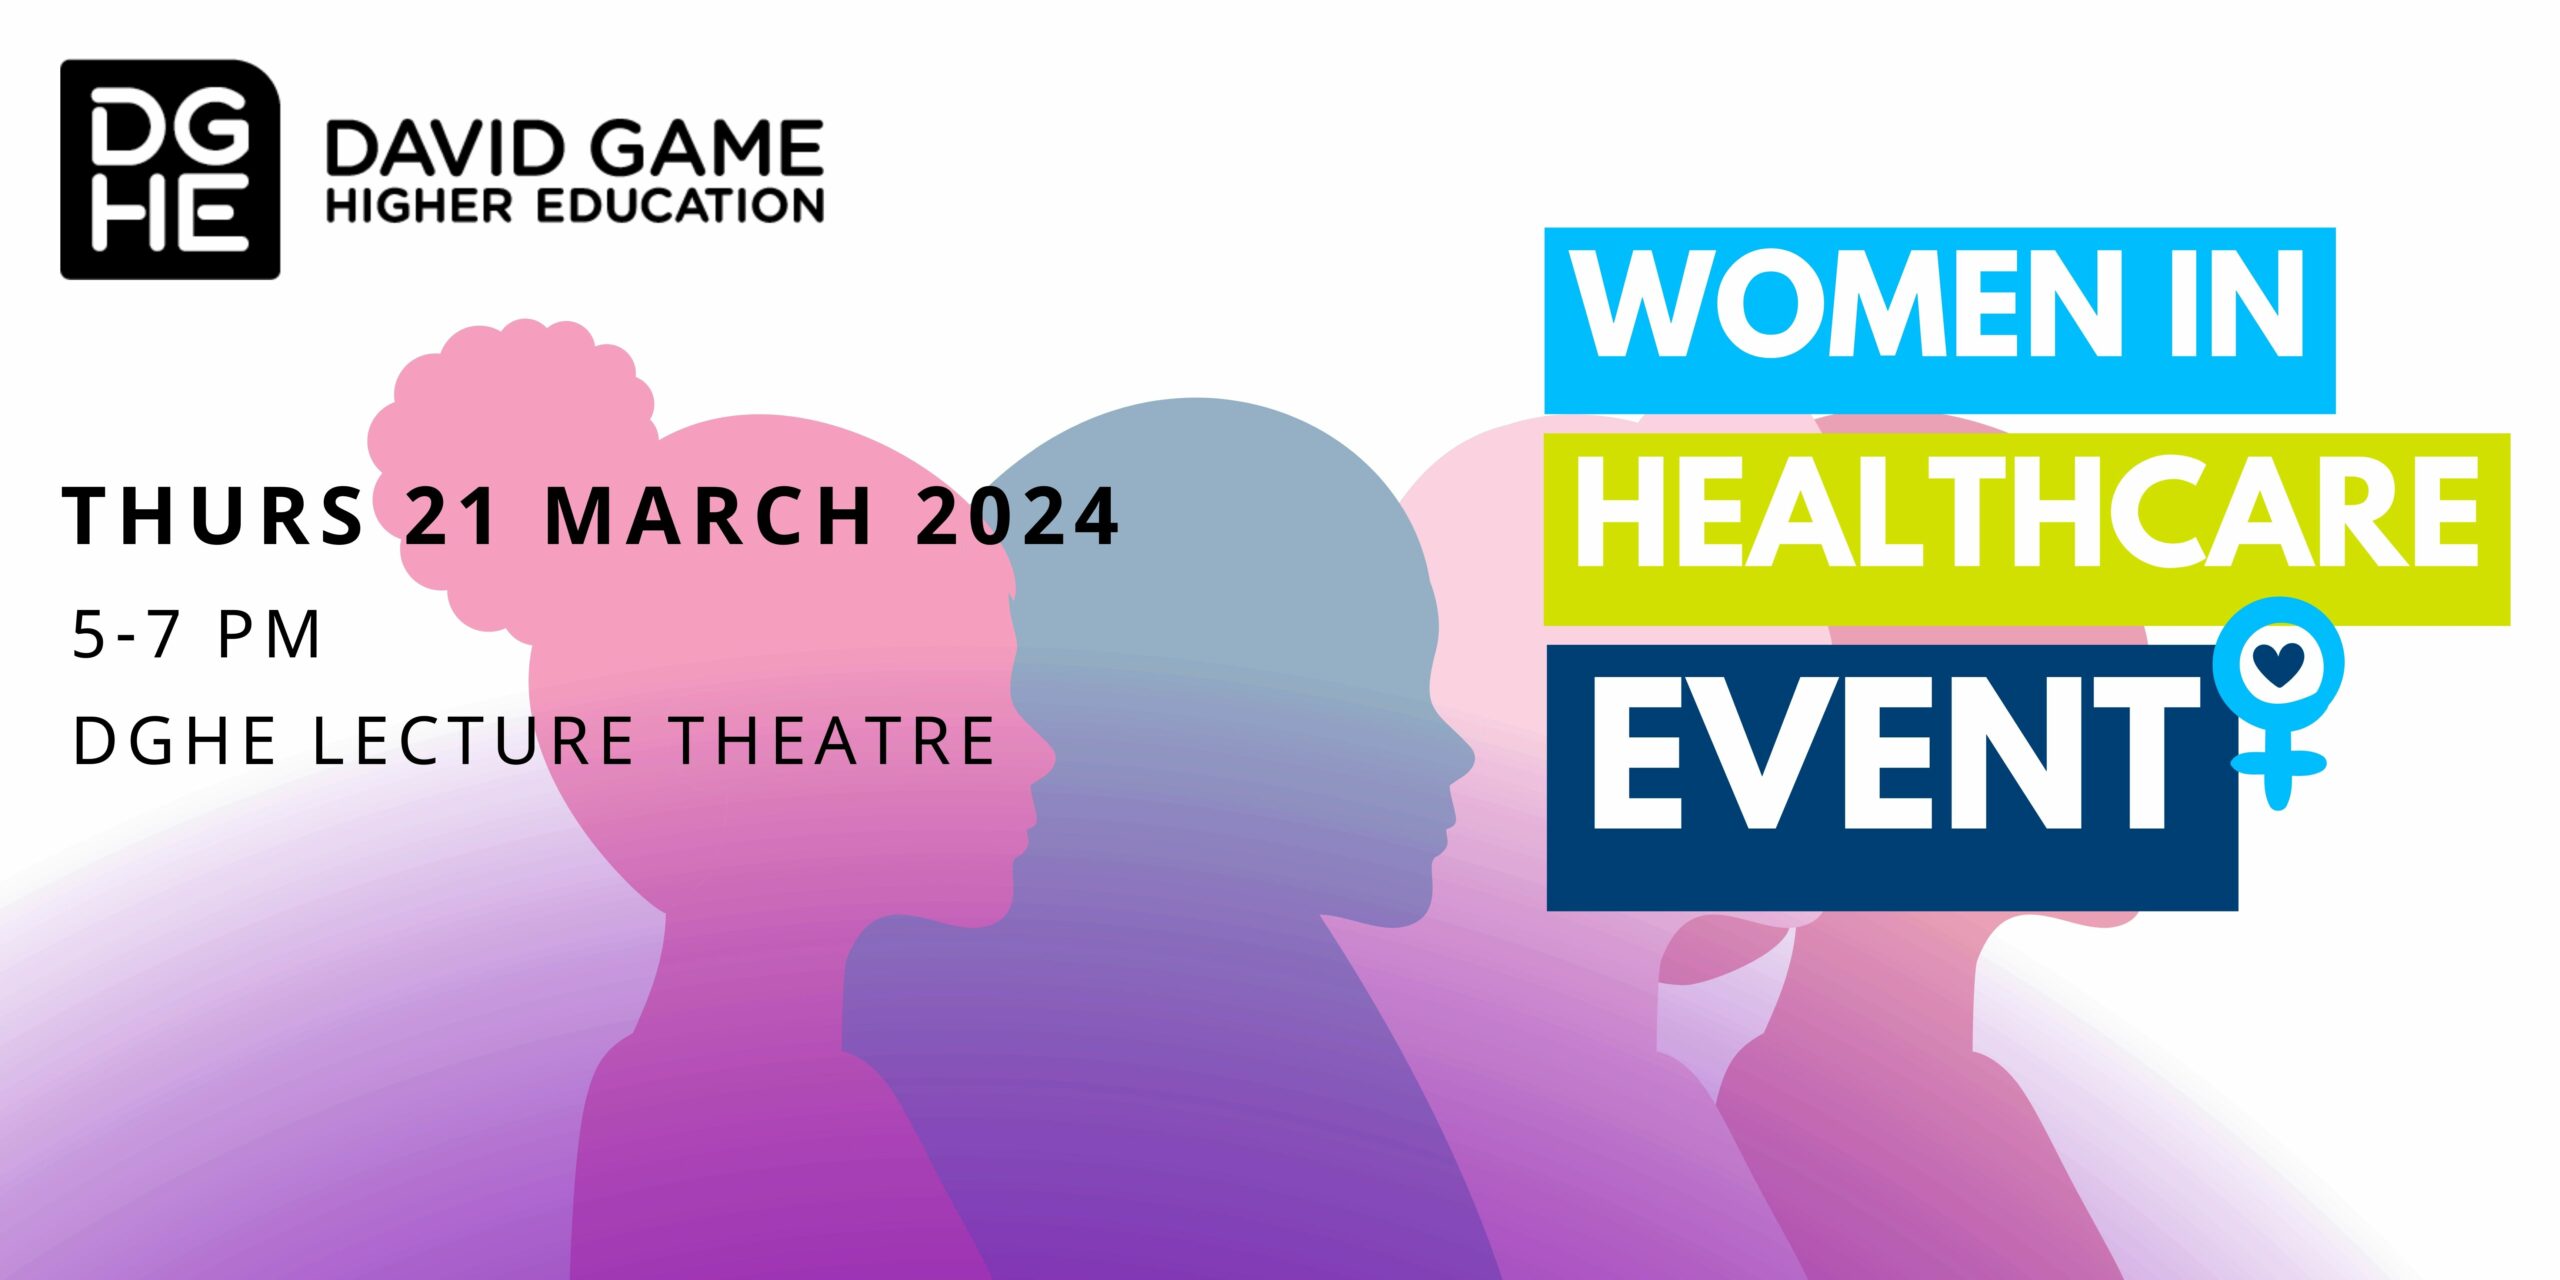 Join us for “Women in Healthcare” Panel Discussion